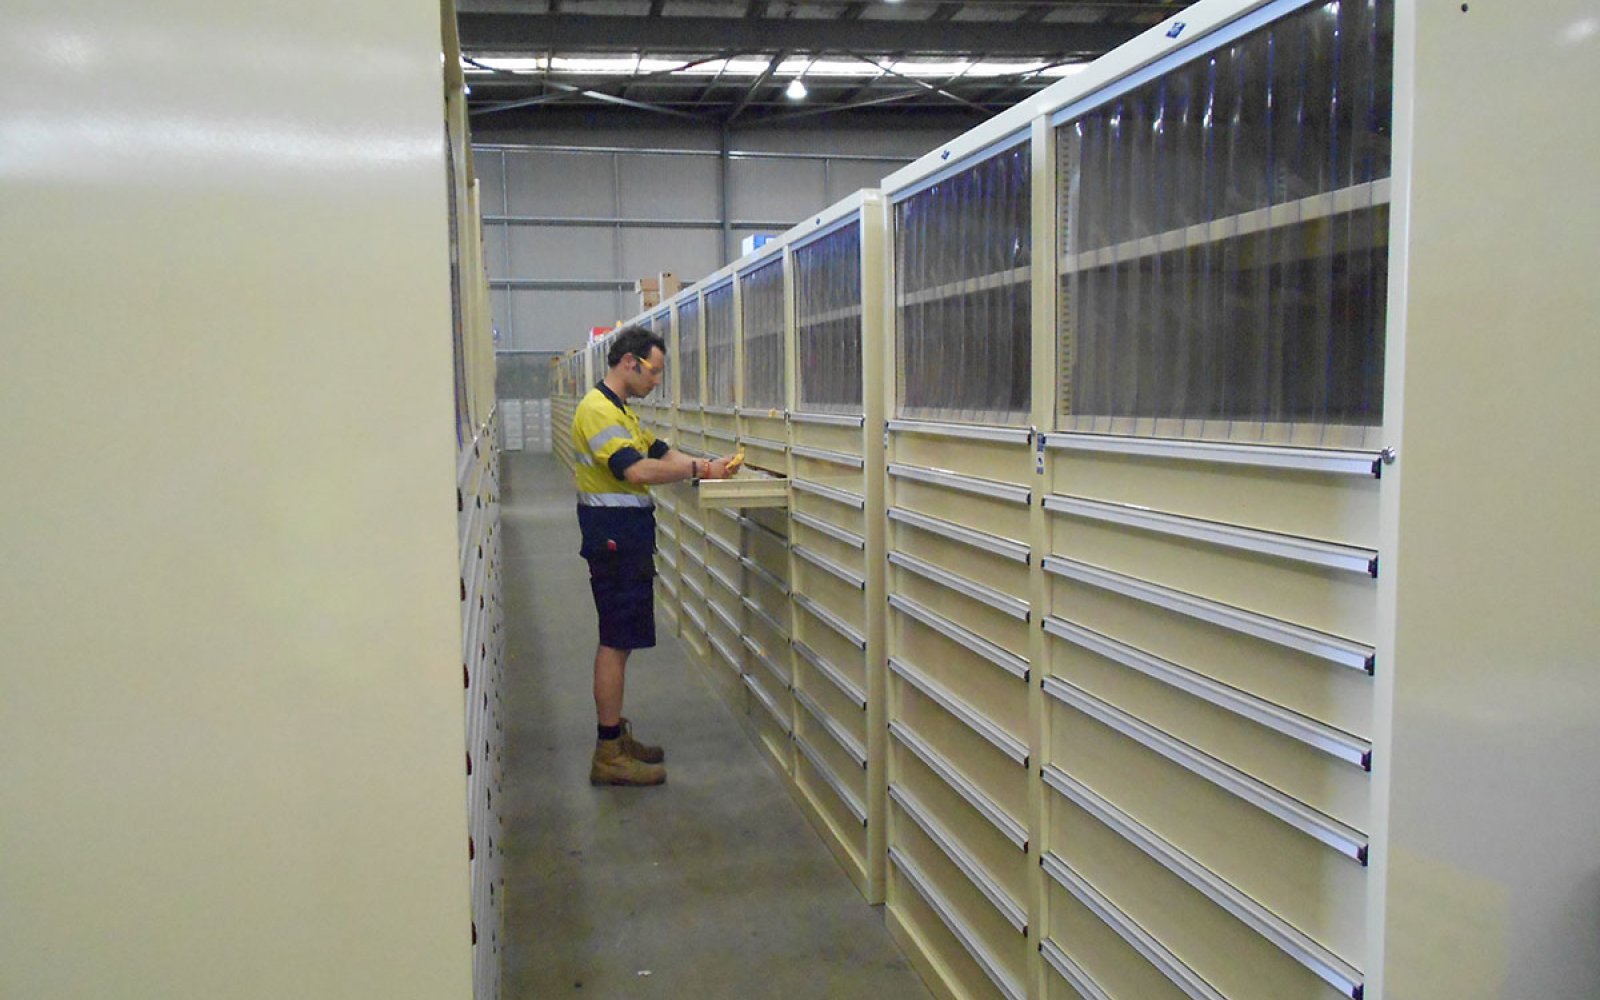 High-Density Storage Modules with Dust Control Curtains at Top